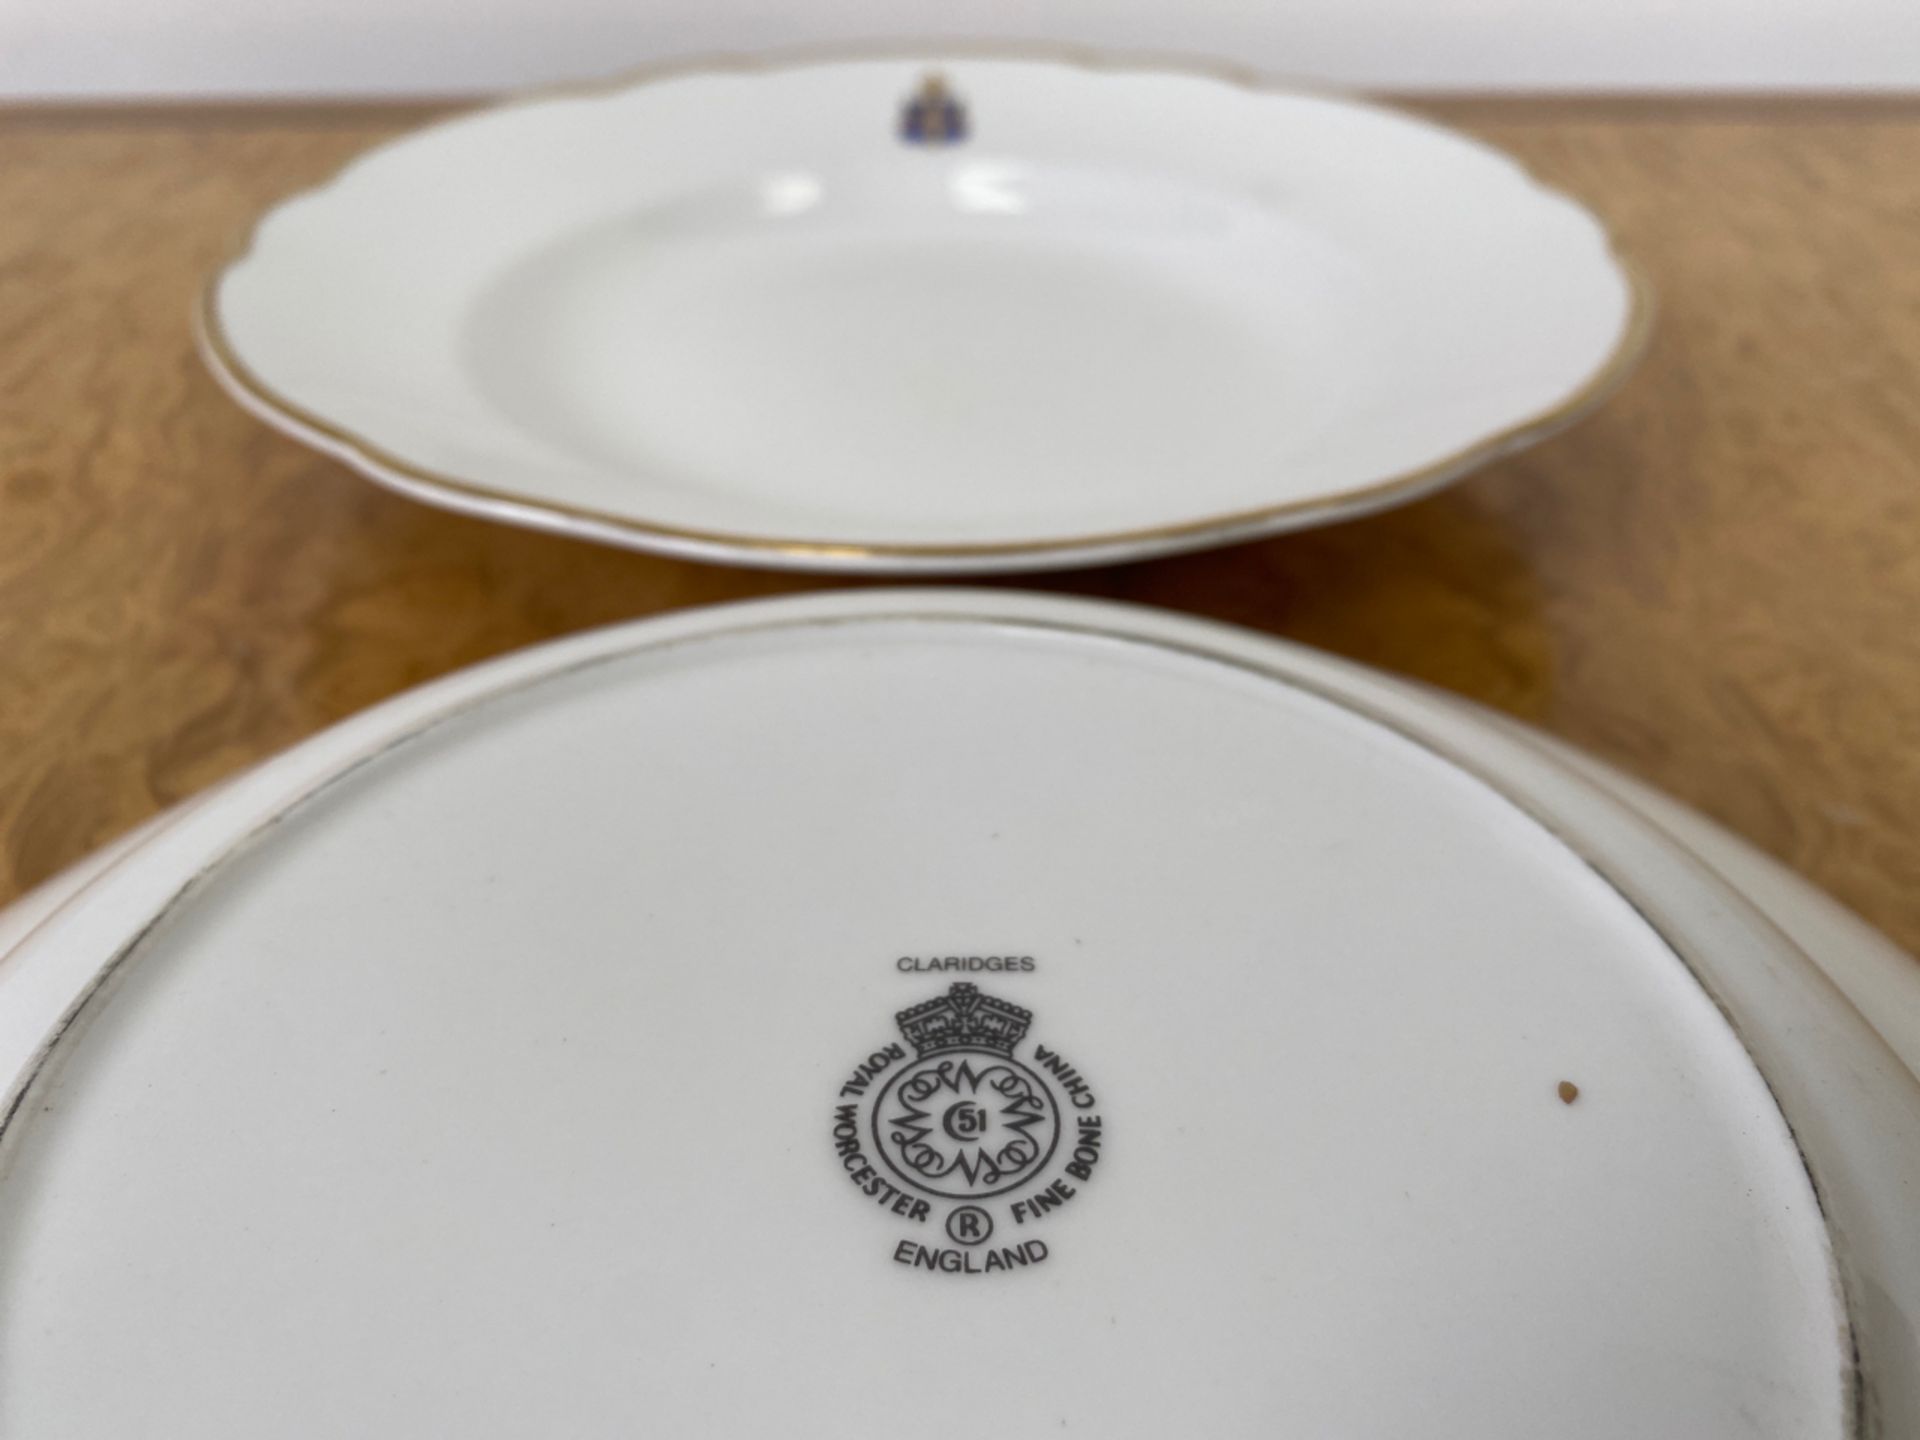 Set of Crested Crockery for Claridge's by Chommette 1884 - Image 27 of 30